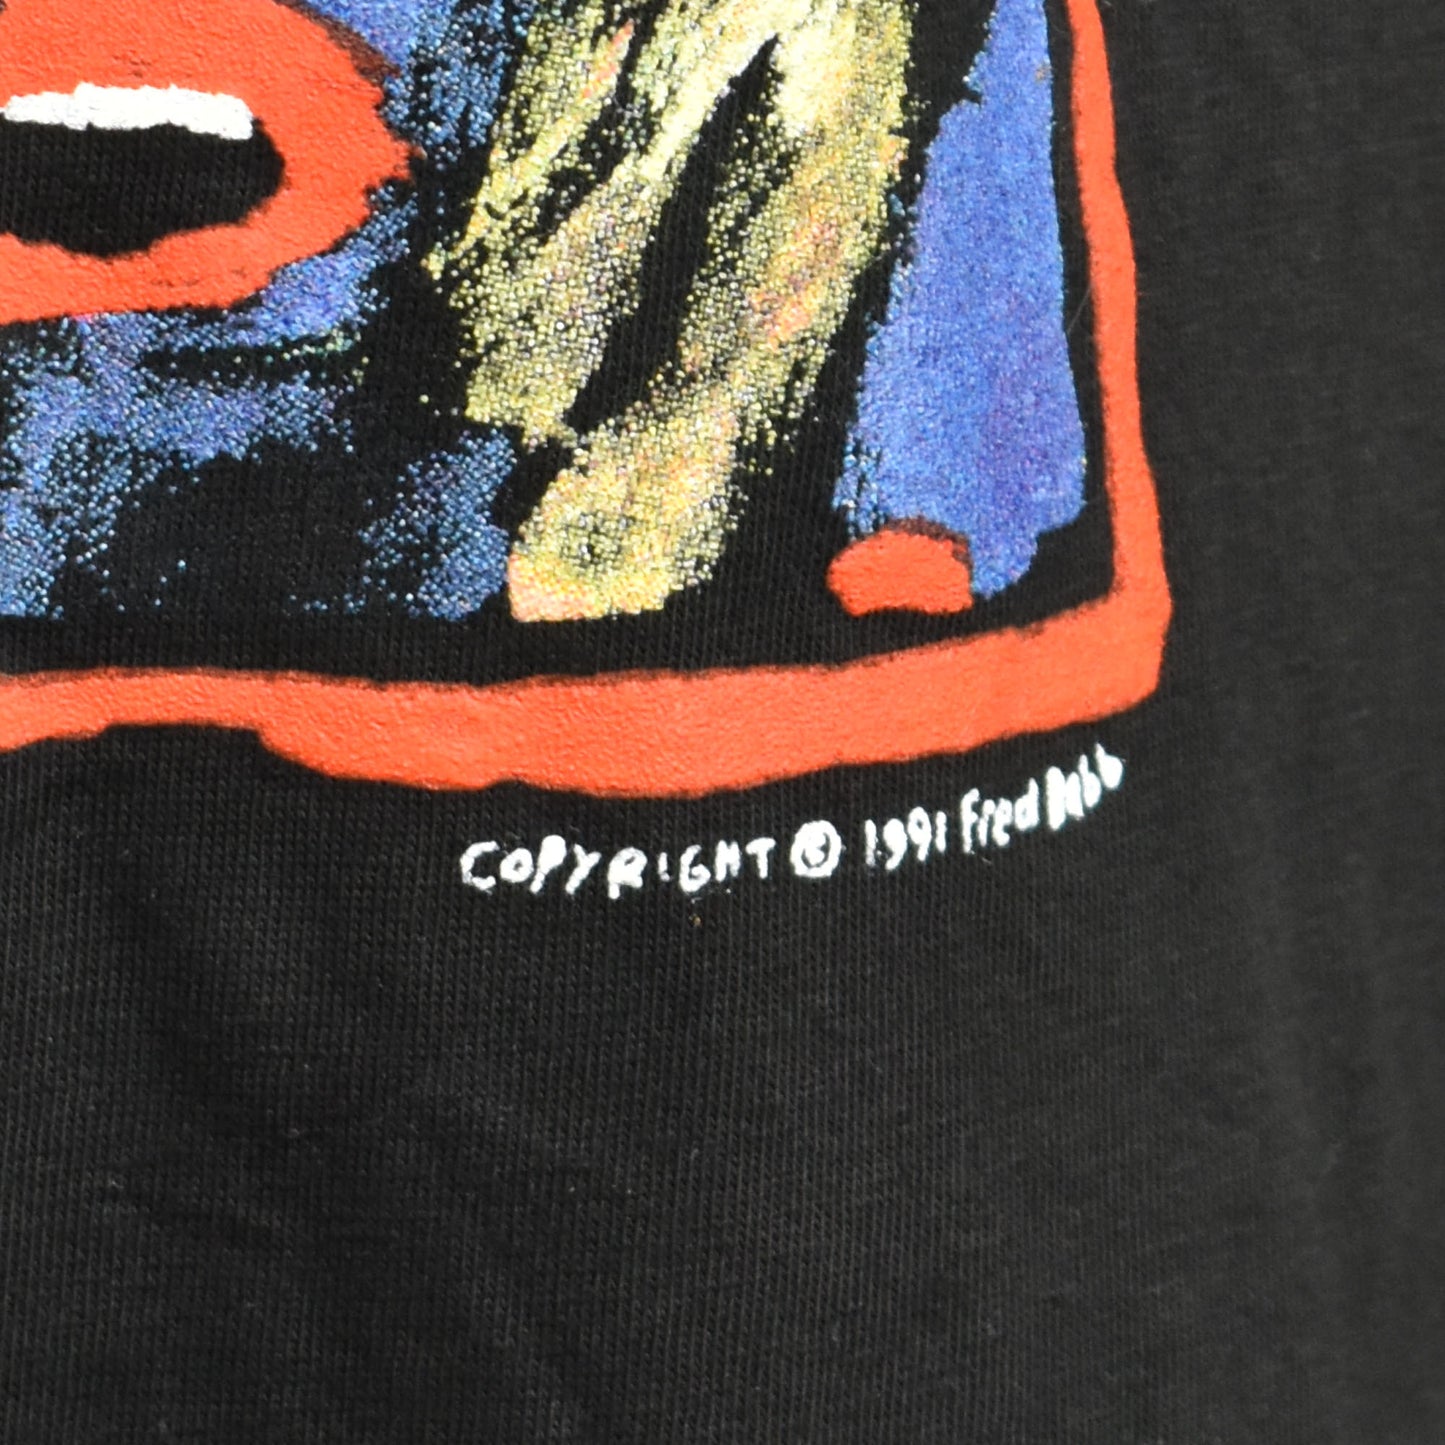 Vintage 1991 90s Pop Art Fred Babb "Art Can't Hurt You" Single Stitch T-shirt - Made in USA - Size L